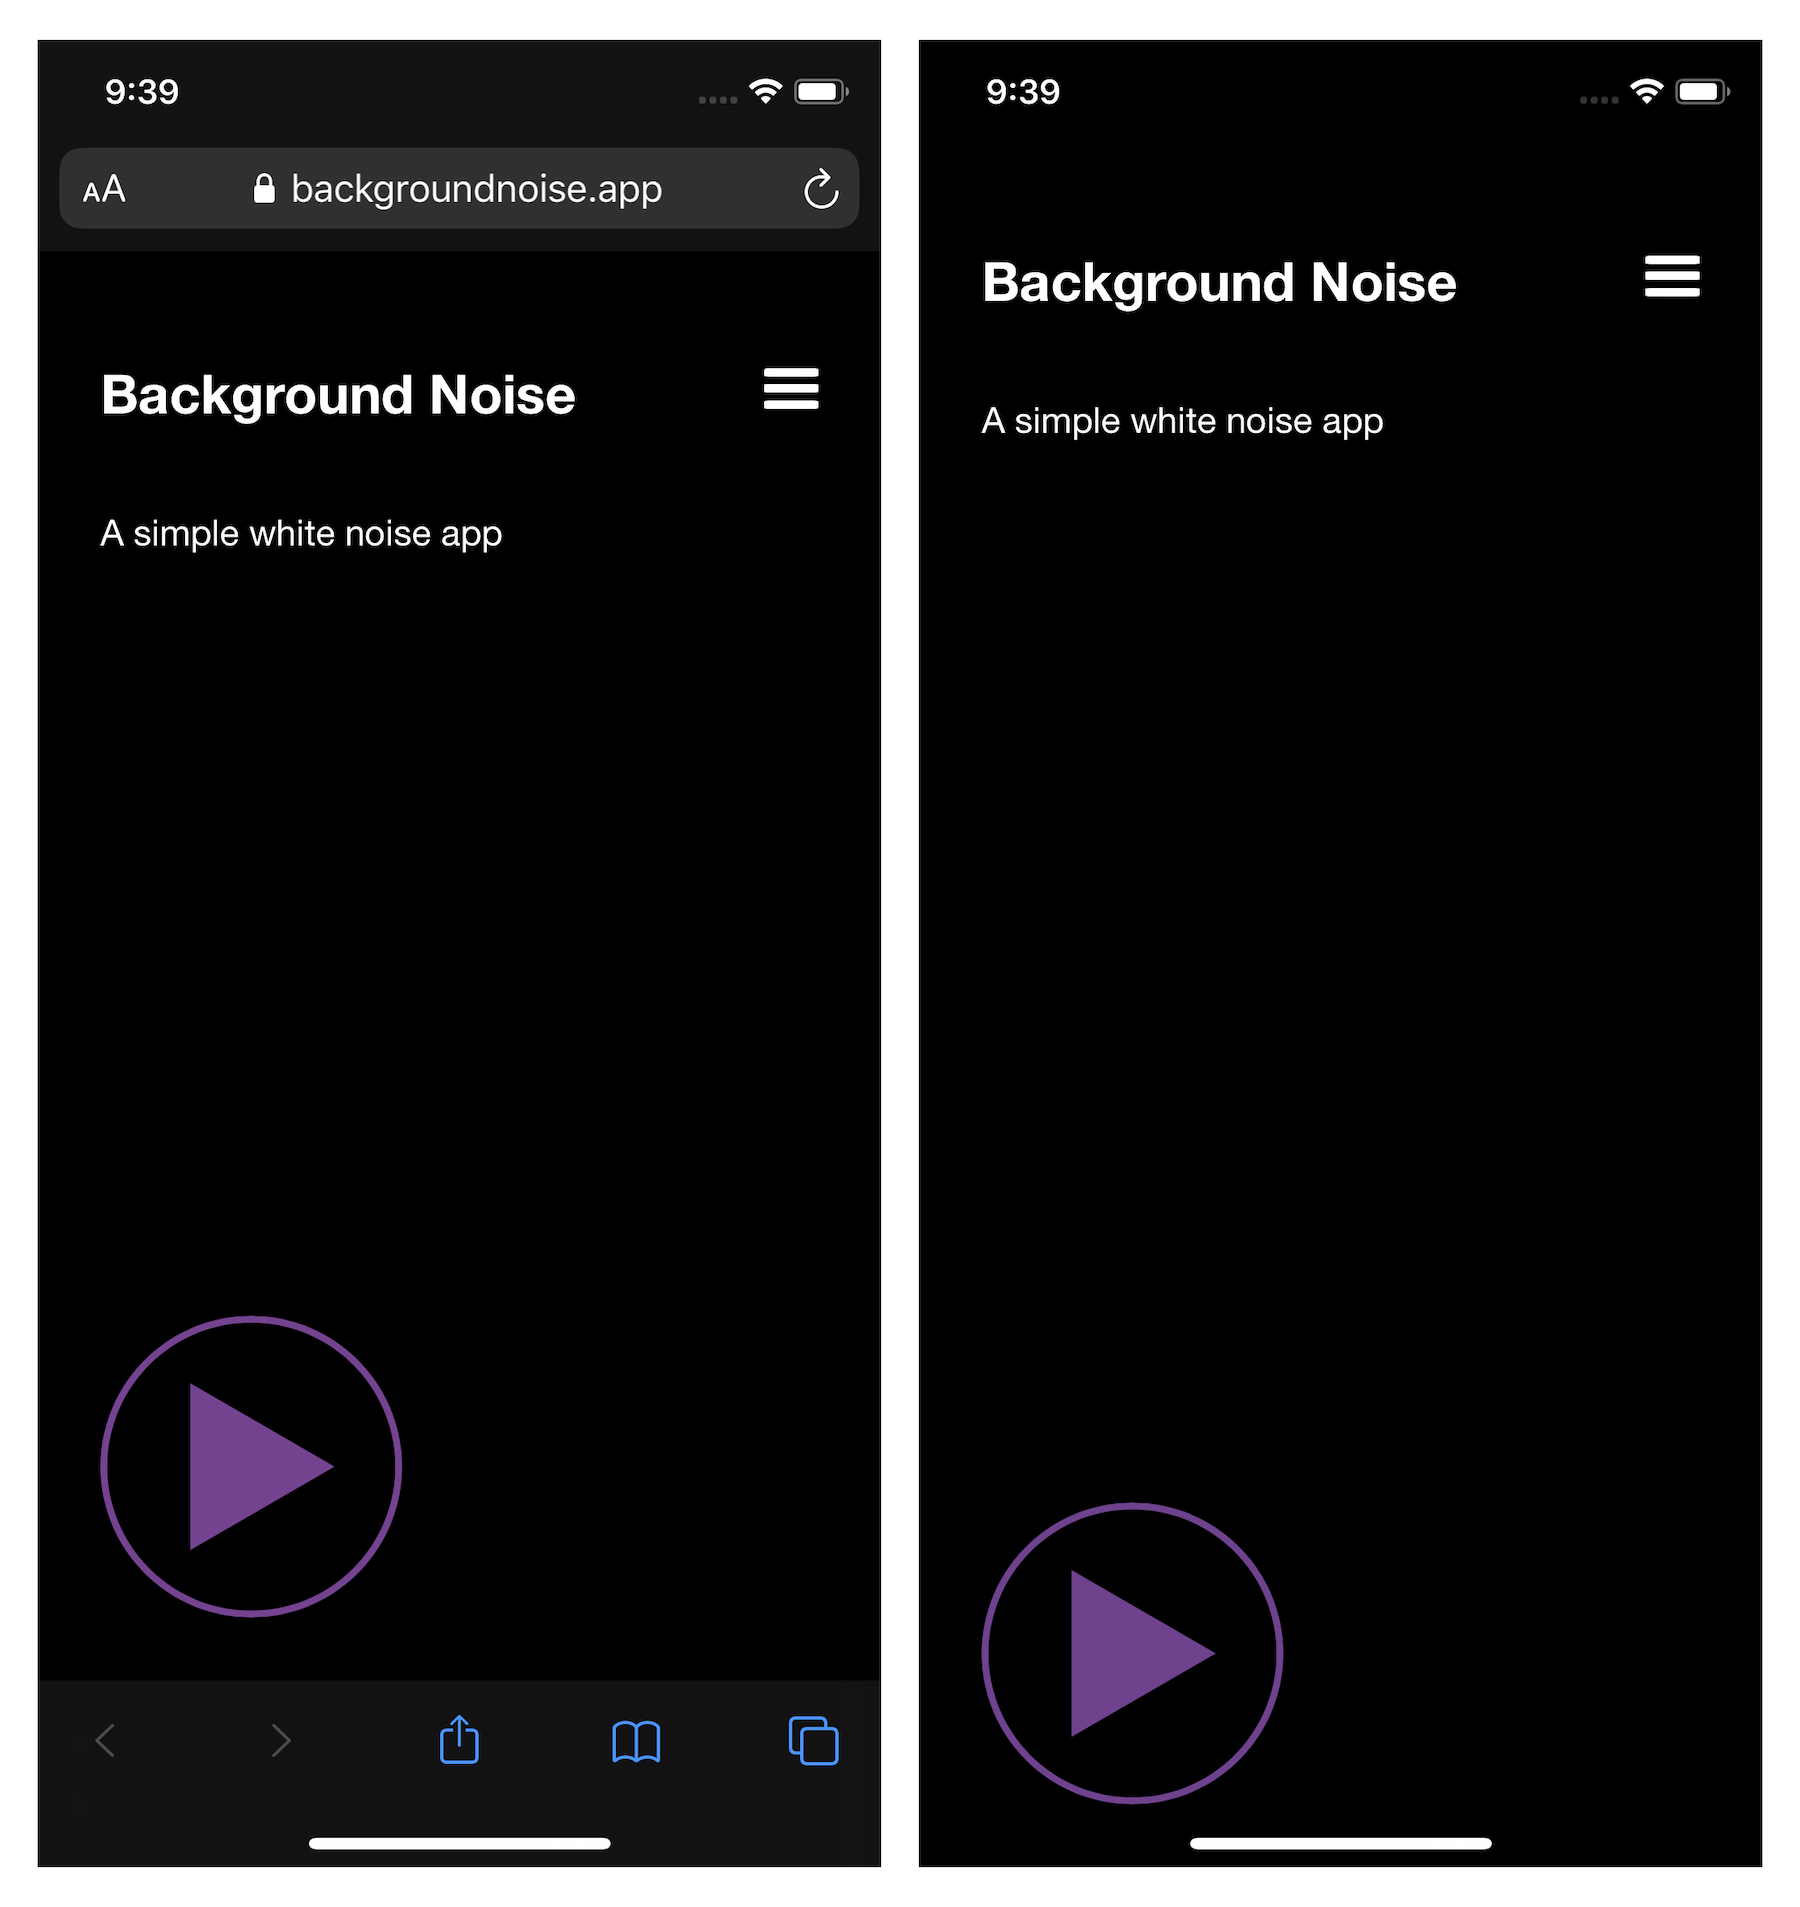 Screenshots of Background Noise, one in Safari and one in standalone